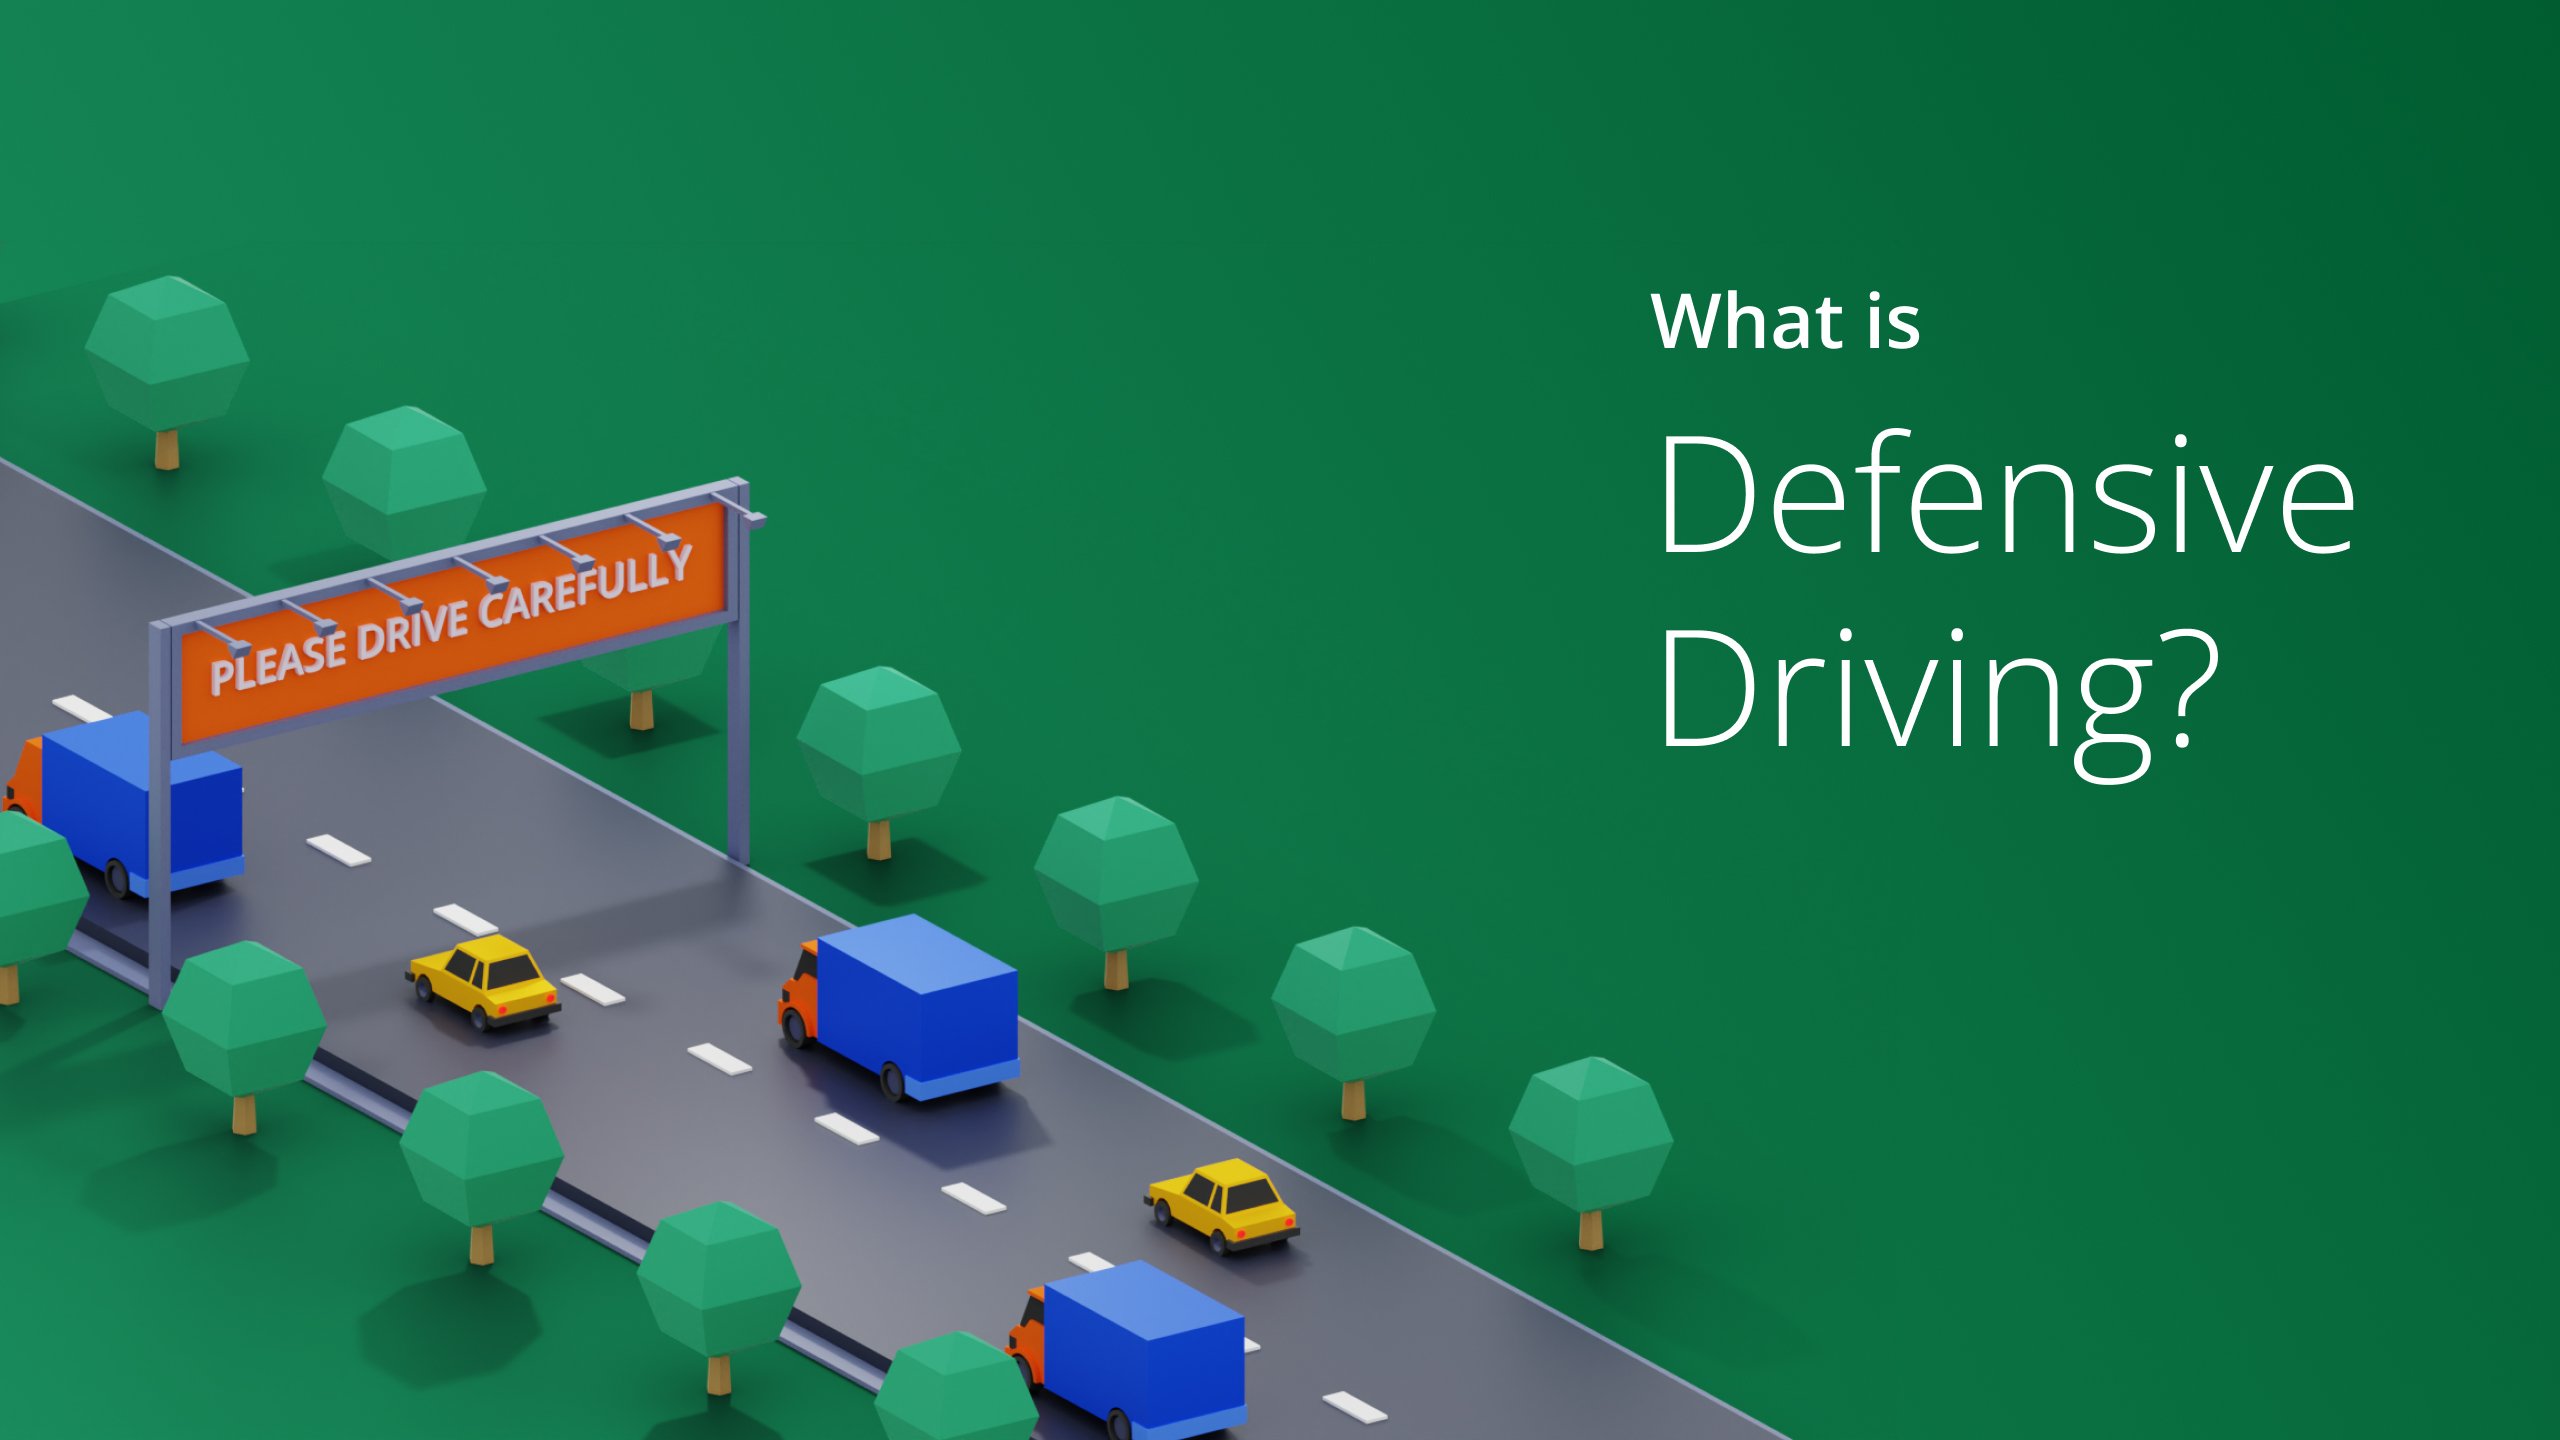 Custom Image - What is defensive driving?